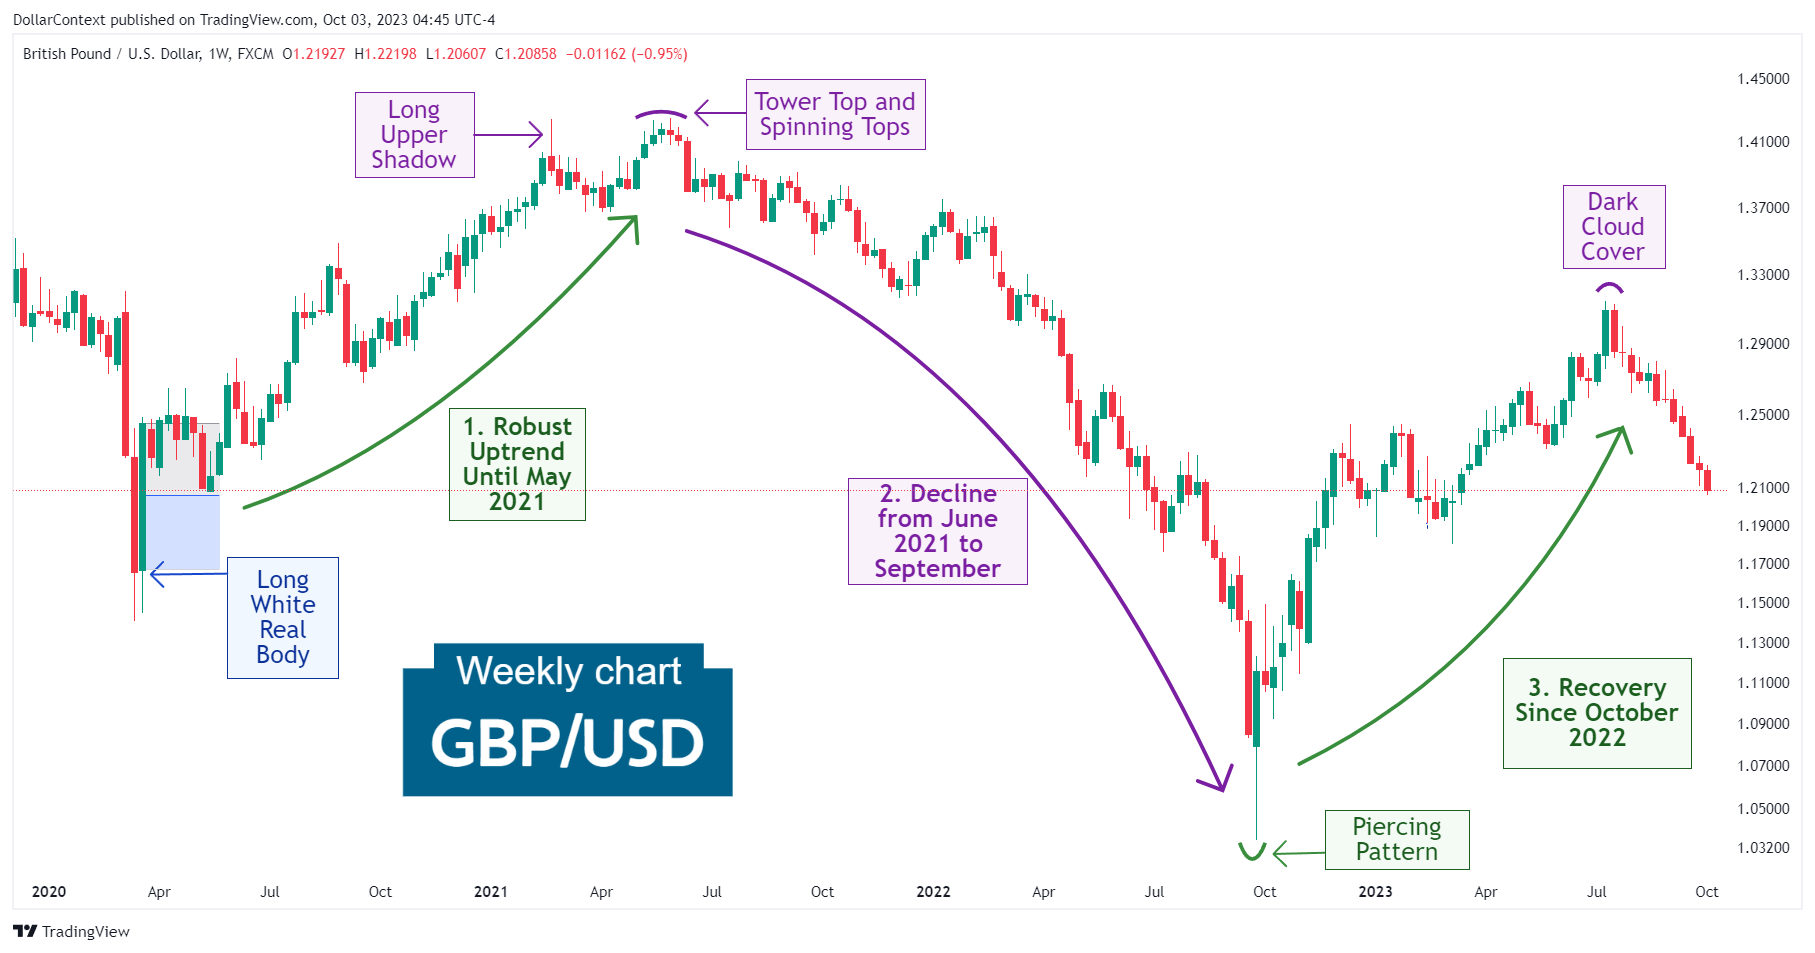 GBP/USD: Significant Rally Since October 2022 (Weekly Chart)